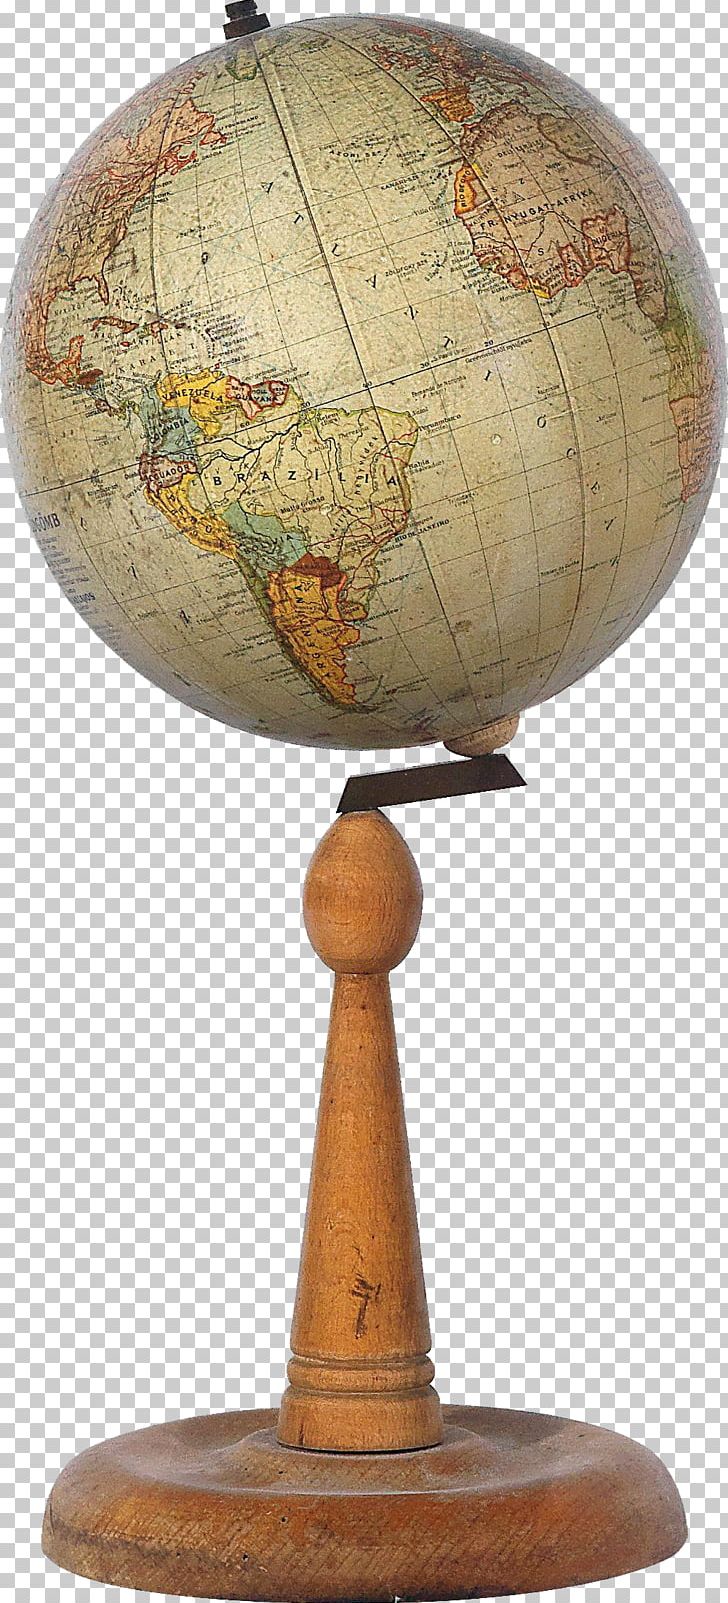 Globe Sphere Ball Earth PNG, Clipart, Ball, Earth, Globe, Magic, Miscellaneous Free PNG Download